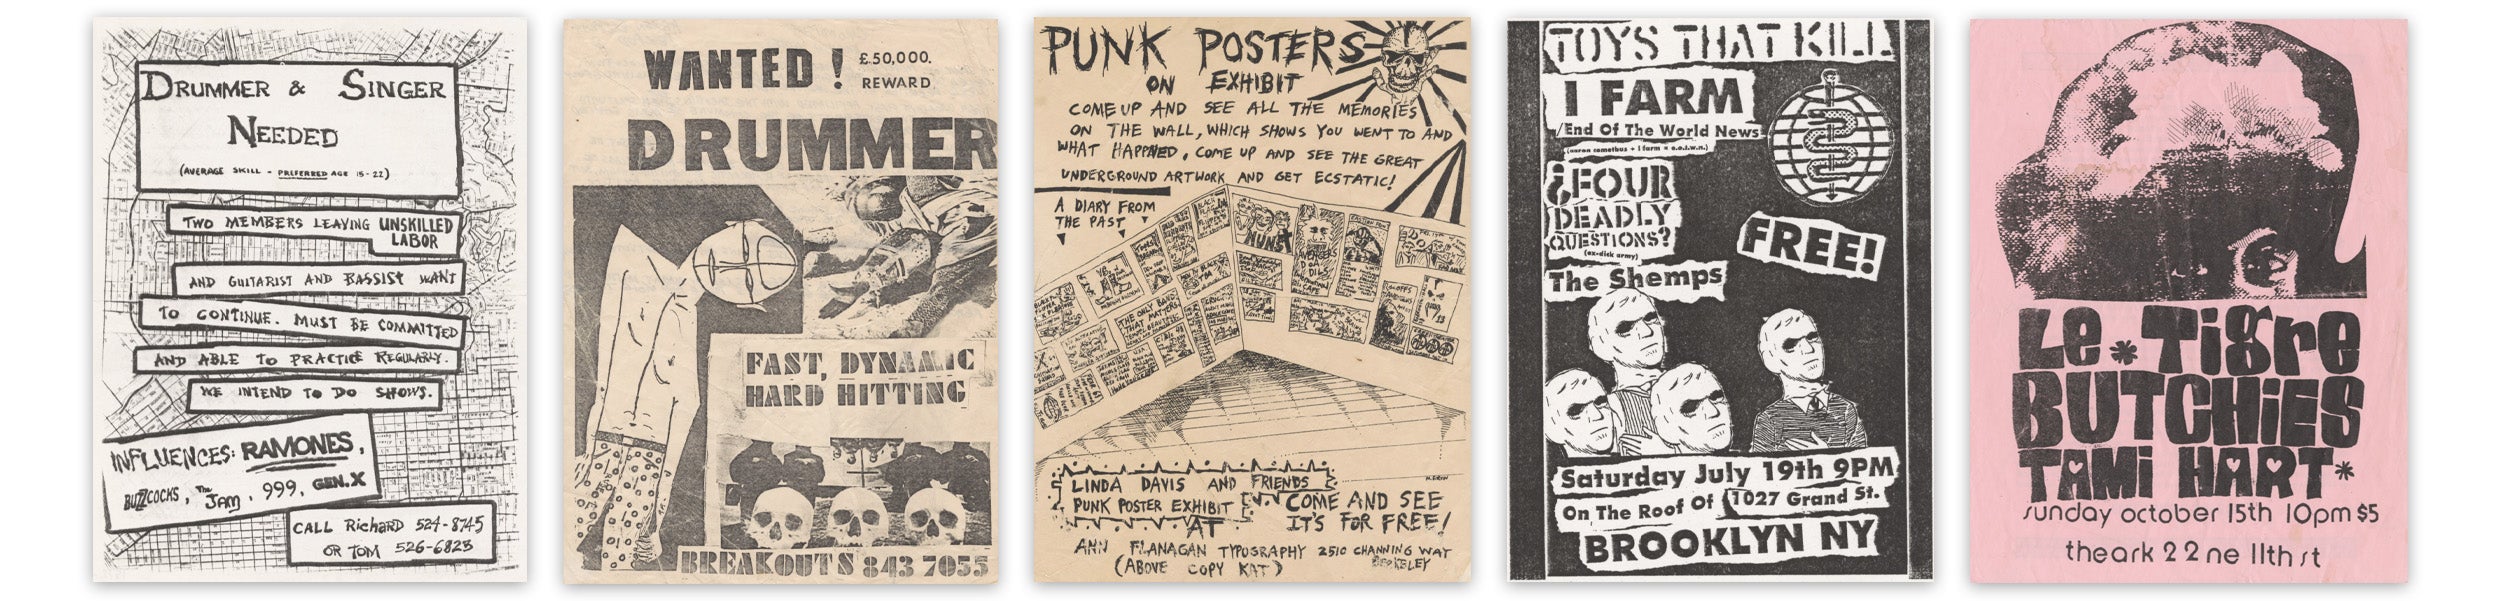 From left to right: This “wanted” ad includes hand-drawn reproductions of other bands’ logos; Undated wanted ad by a band looking for a drummer; A punk-style poster promoting and exhibit of punk posters; Poster for a 2003 gig in Brooklyn, in the classic photocopy style; Flyer for Le Tigre and others, ca 2000-2003